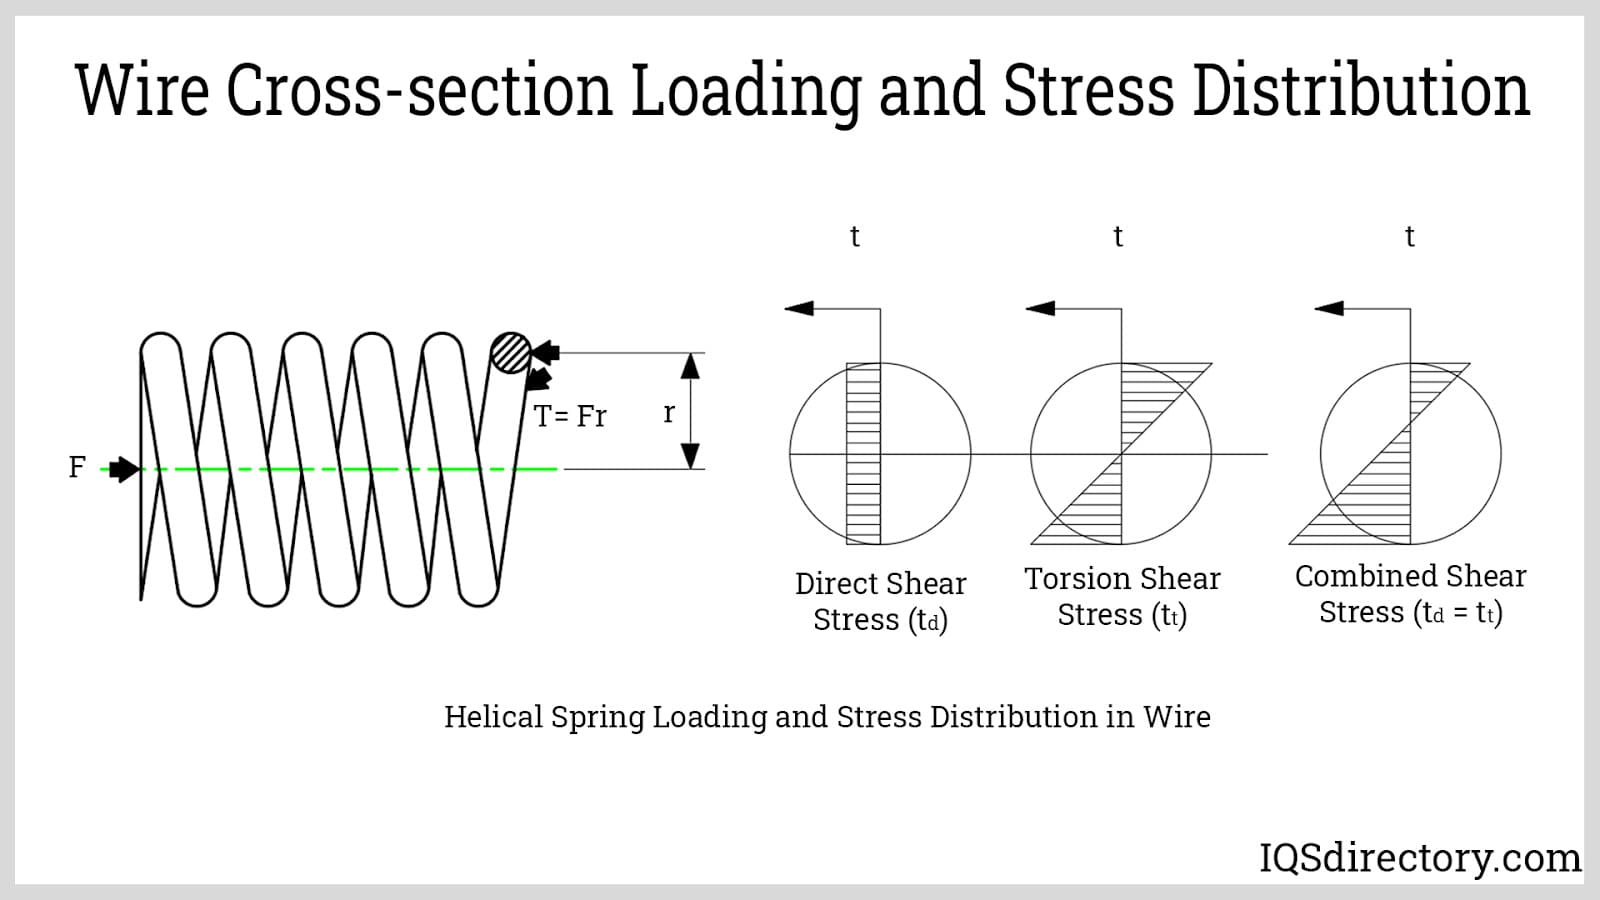 Wire Cross-section Loading and Stress Distribution